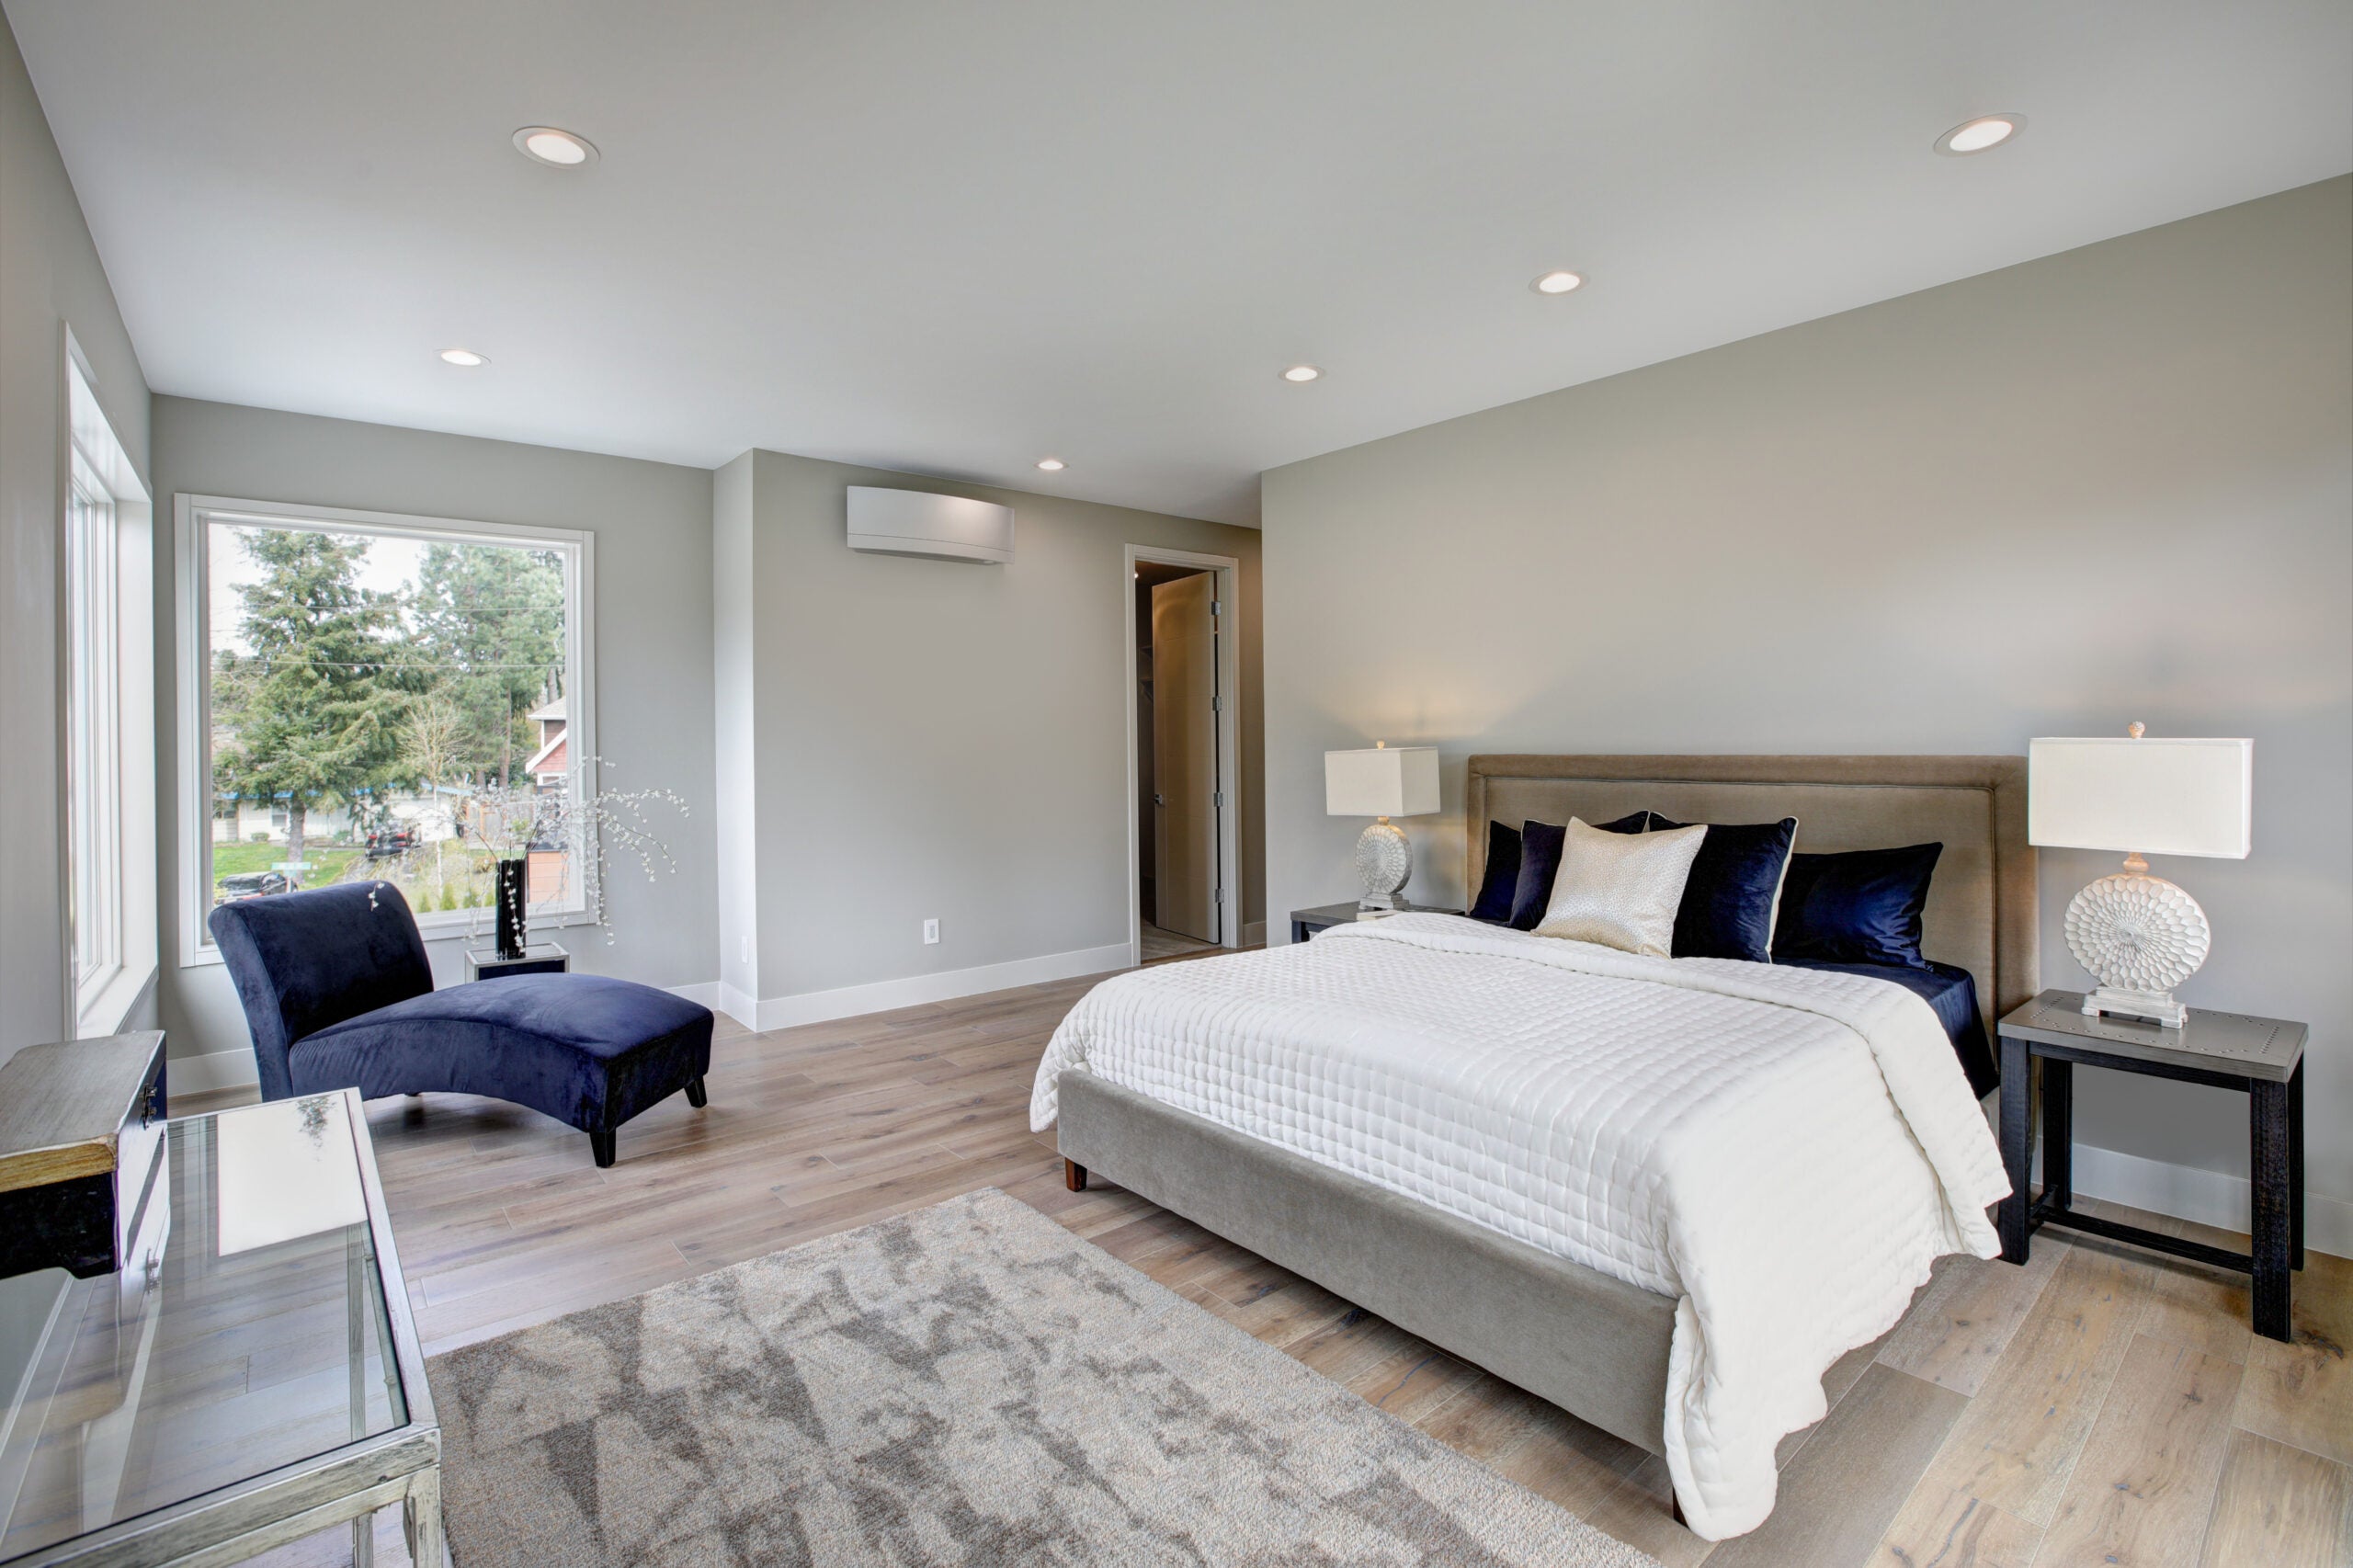 Master bedroom interior with private balcony in a new construction home. Northwest, USA